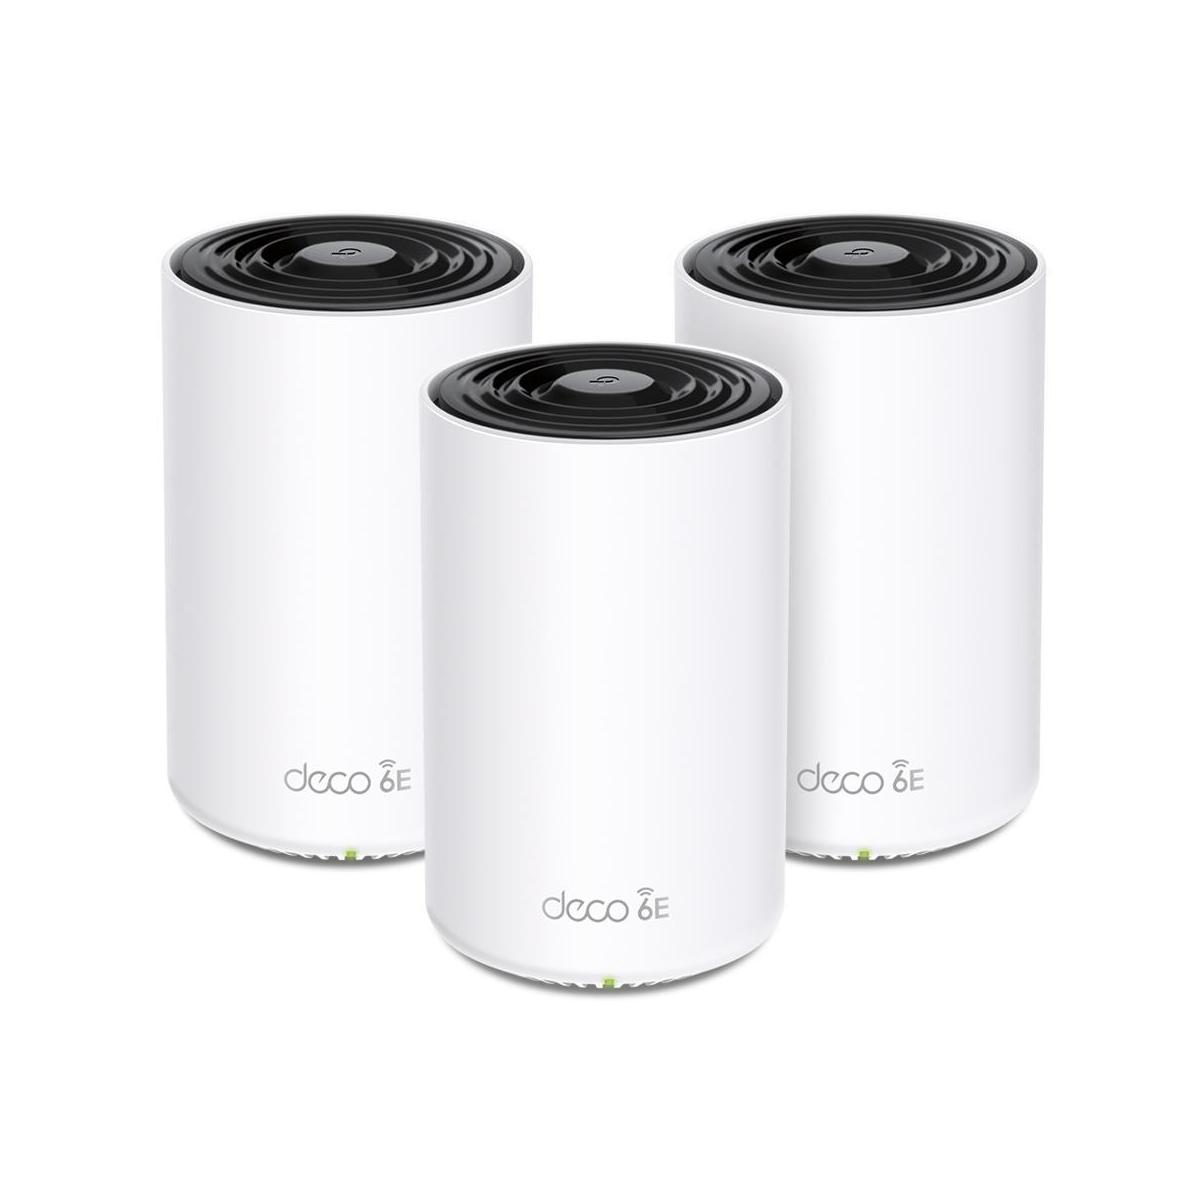 Access DECO XE75(3-PACK) Point TP-LINK